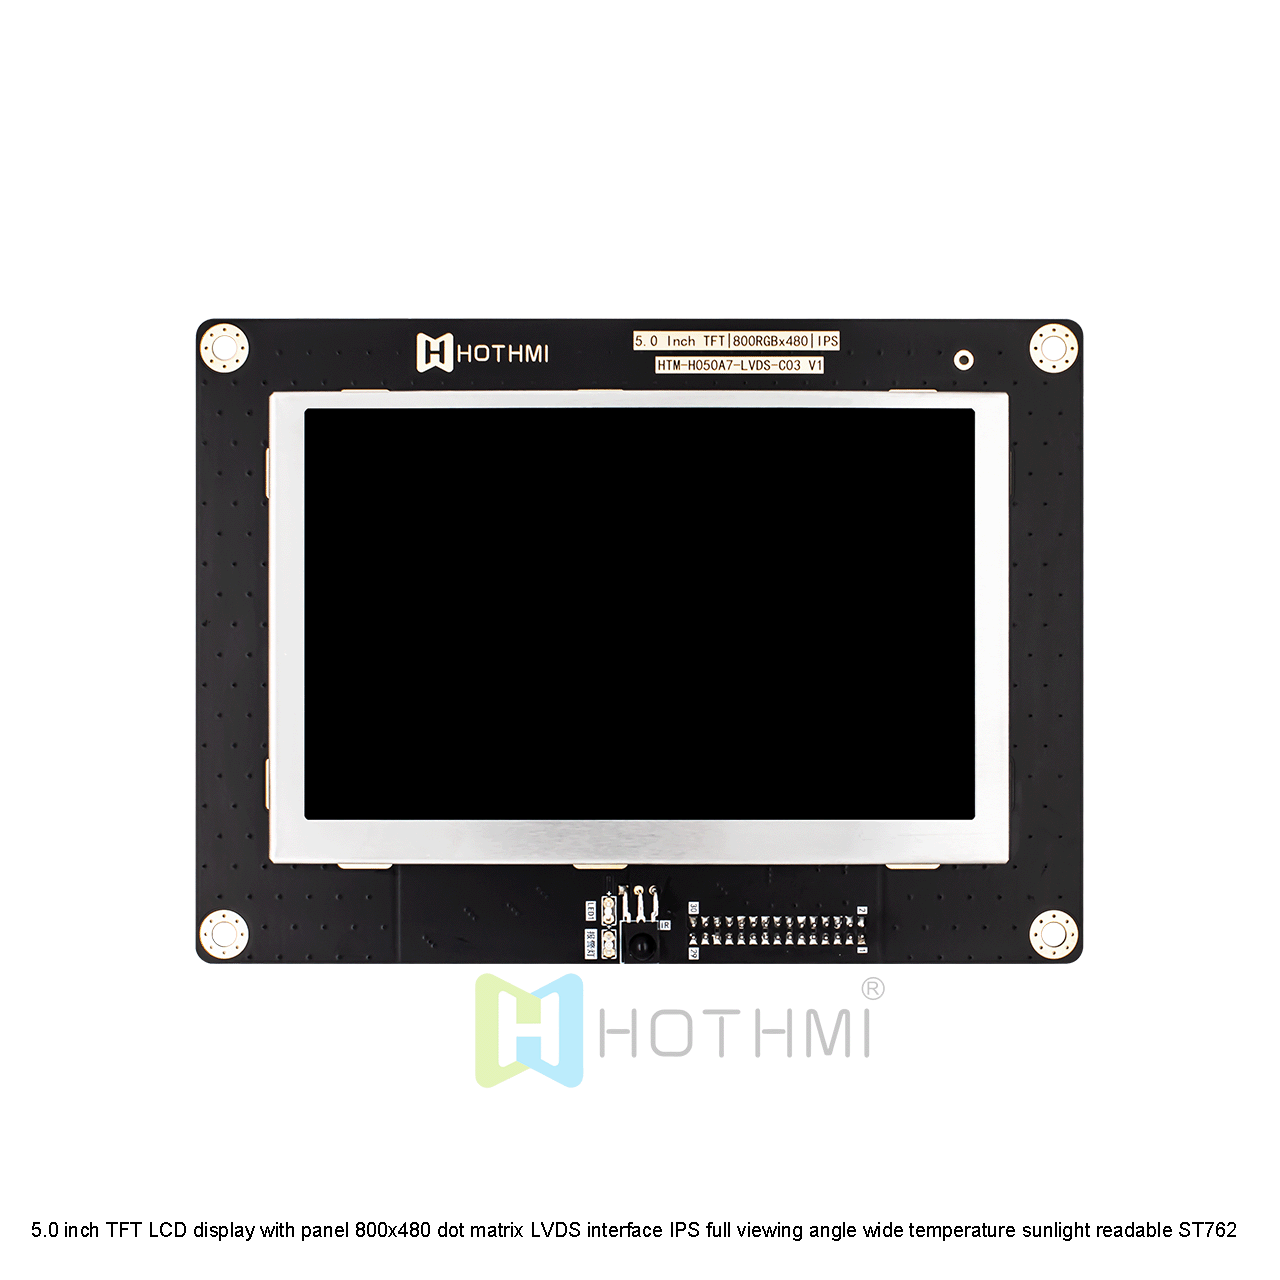 5.0 inch TFT LCD display with panel 800x480 dot matrix LVDS interface IPS full viewing angle wide temperature sunlight readable ST762 compatible with Android optional touch screen